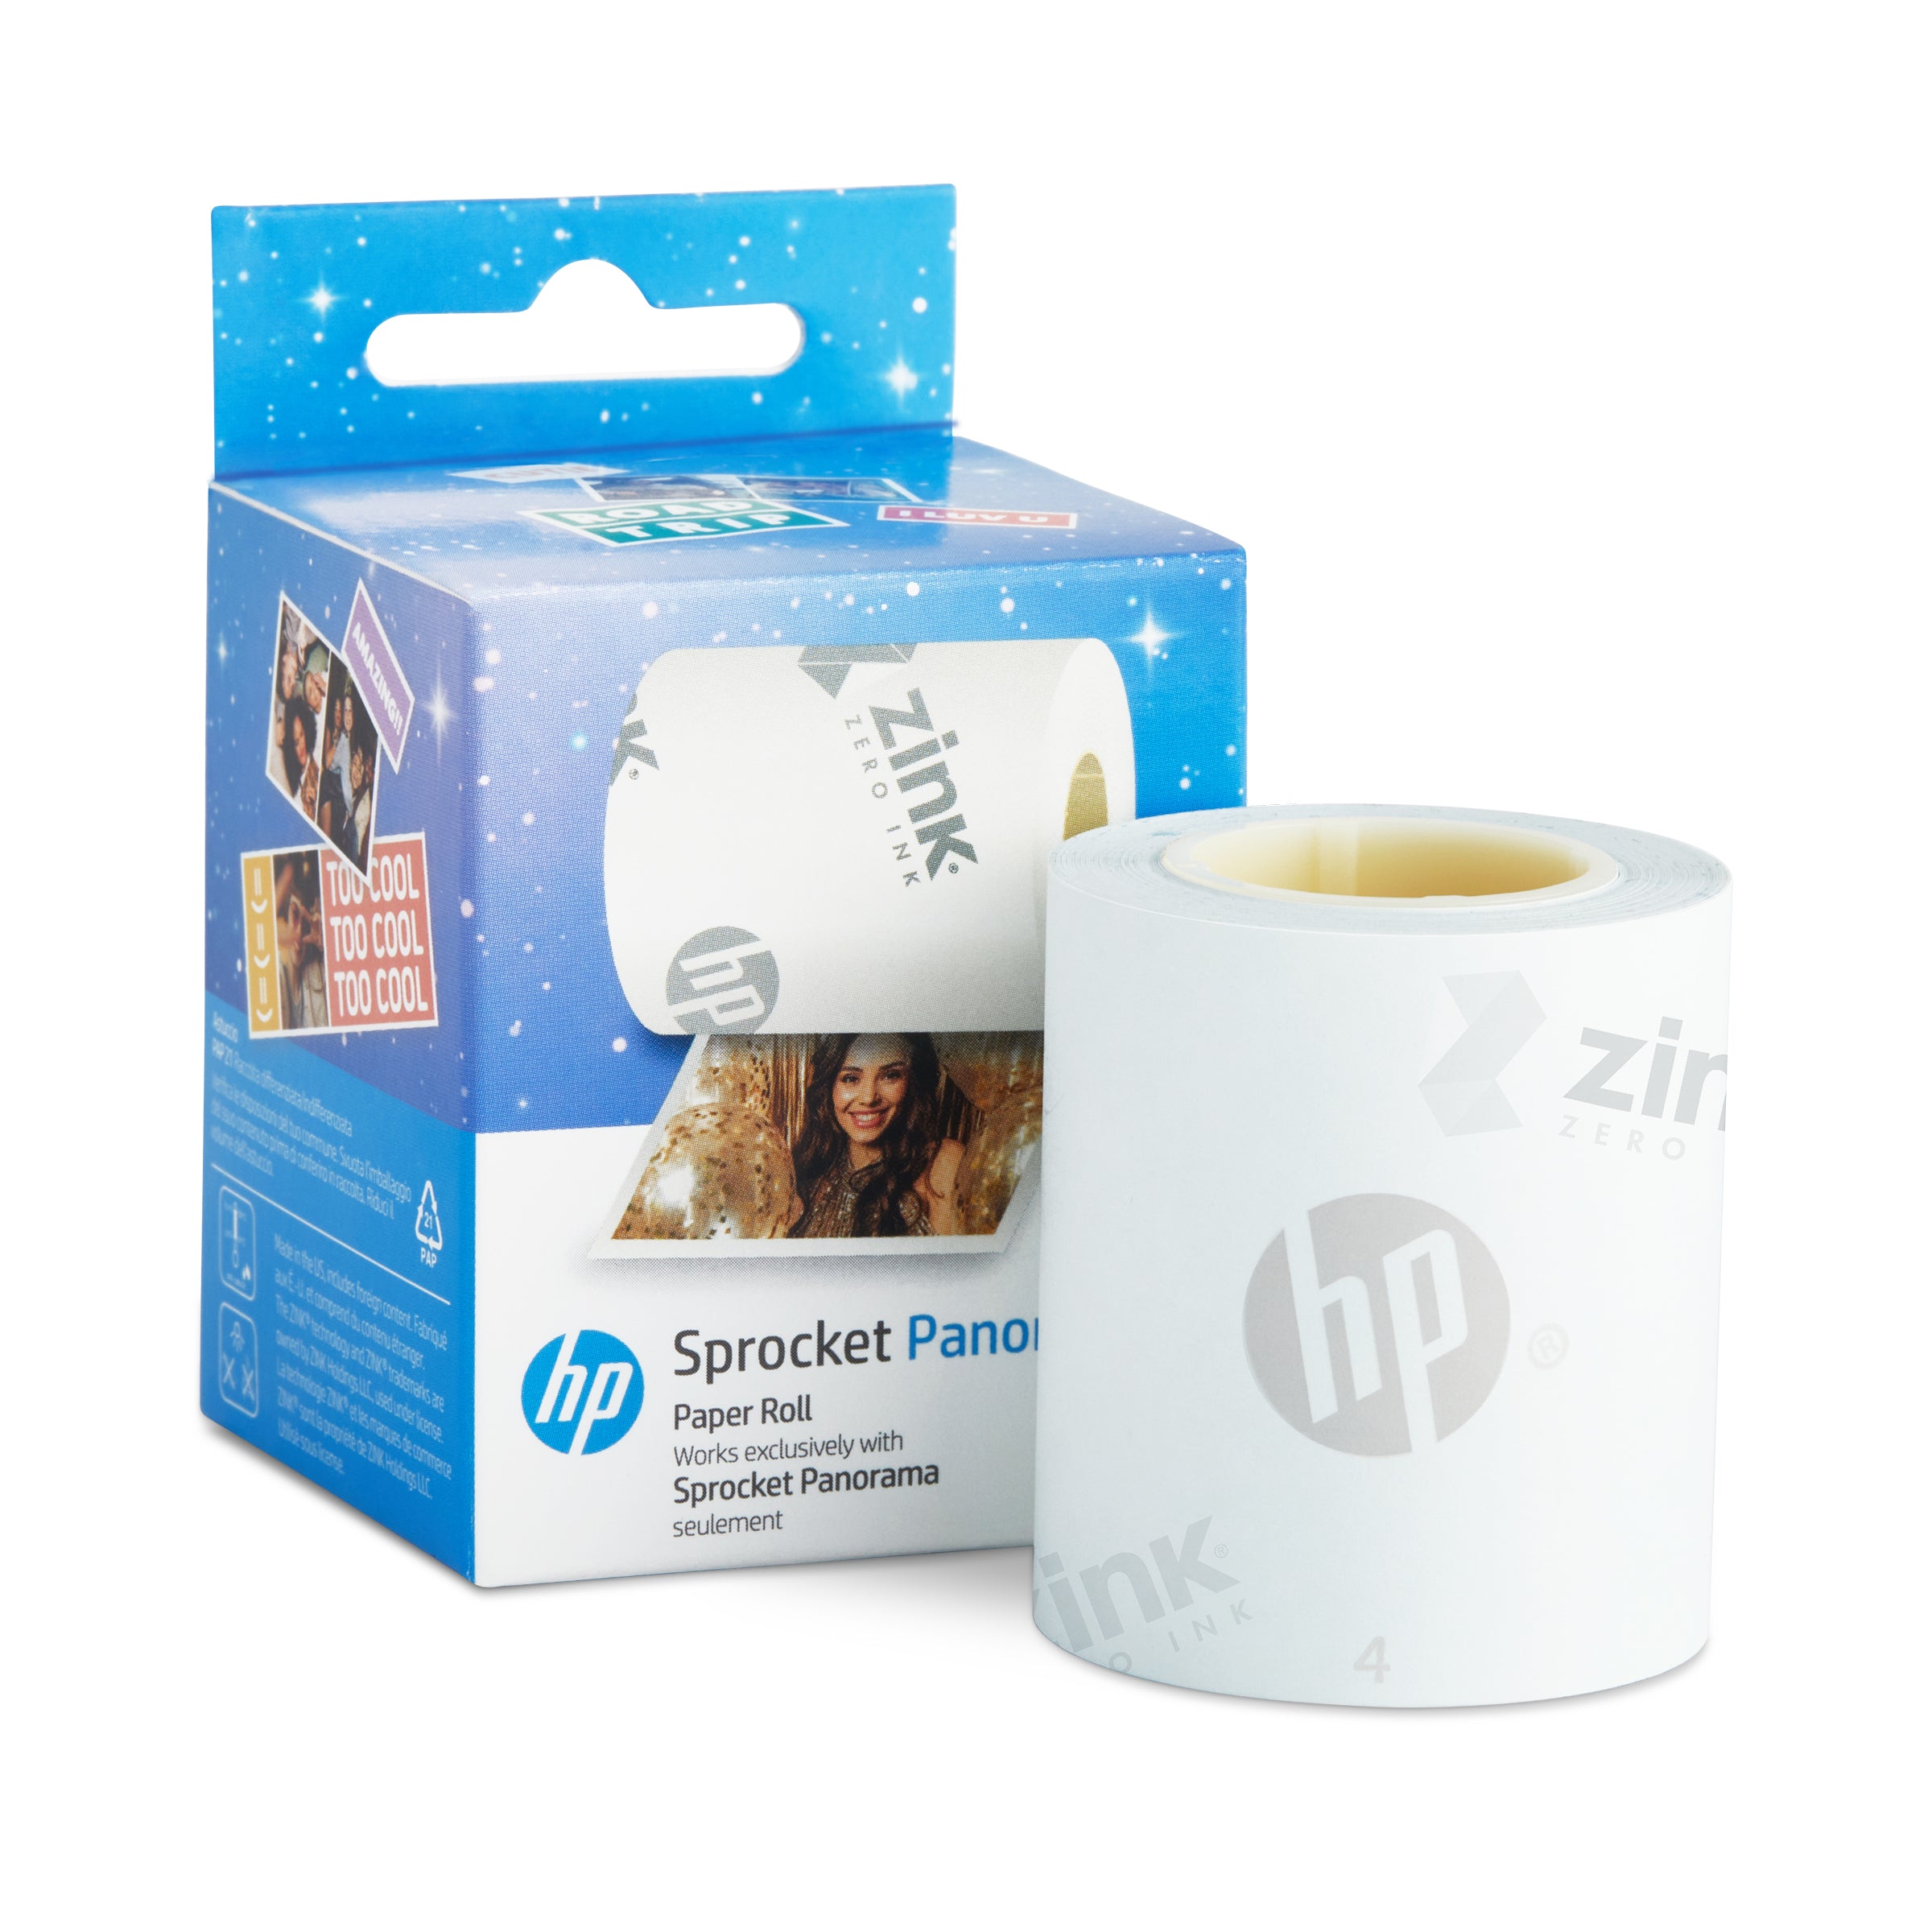 HP Sprocket Panorama Instant Portable Color Label & Photo Printer (Grey) Starter Bundle with case and HP Zink roll Sprocket Printers